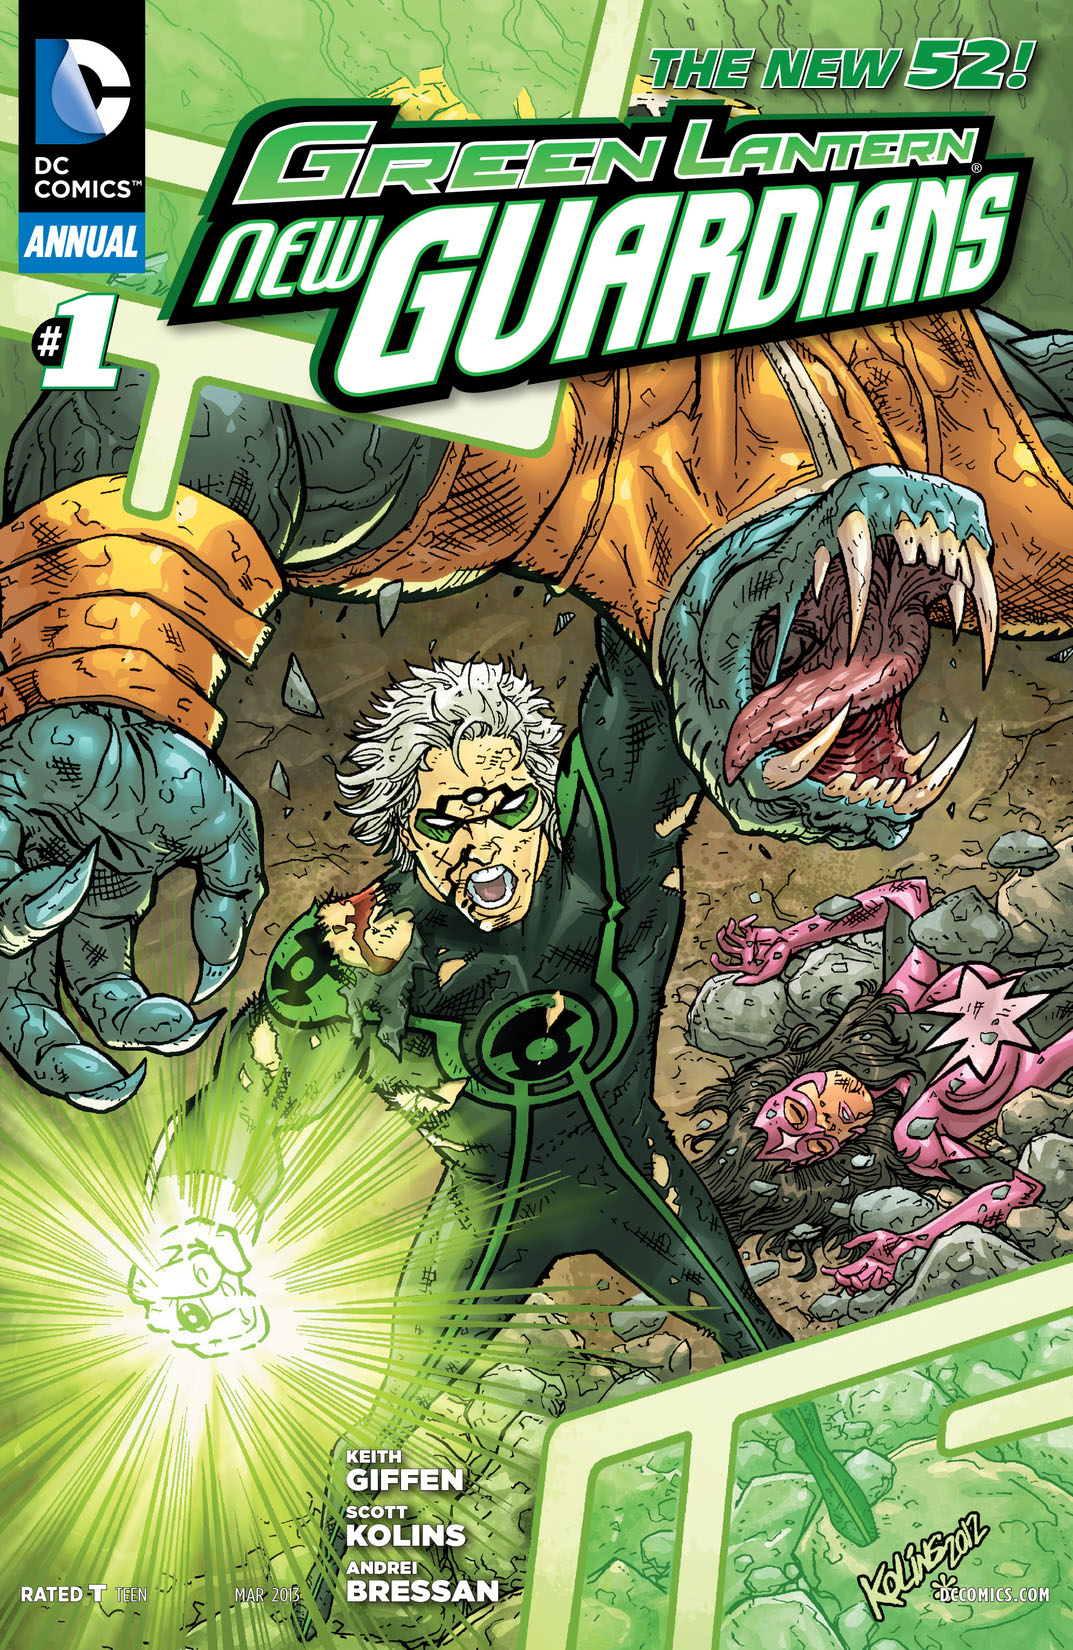 Green Lantern: New Guardians Annual #1 preview images